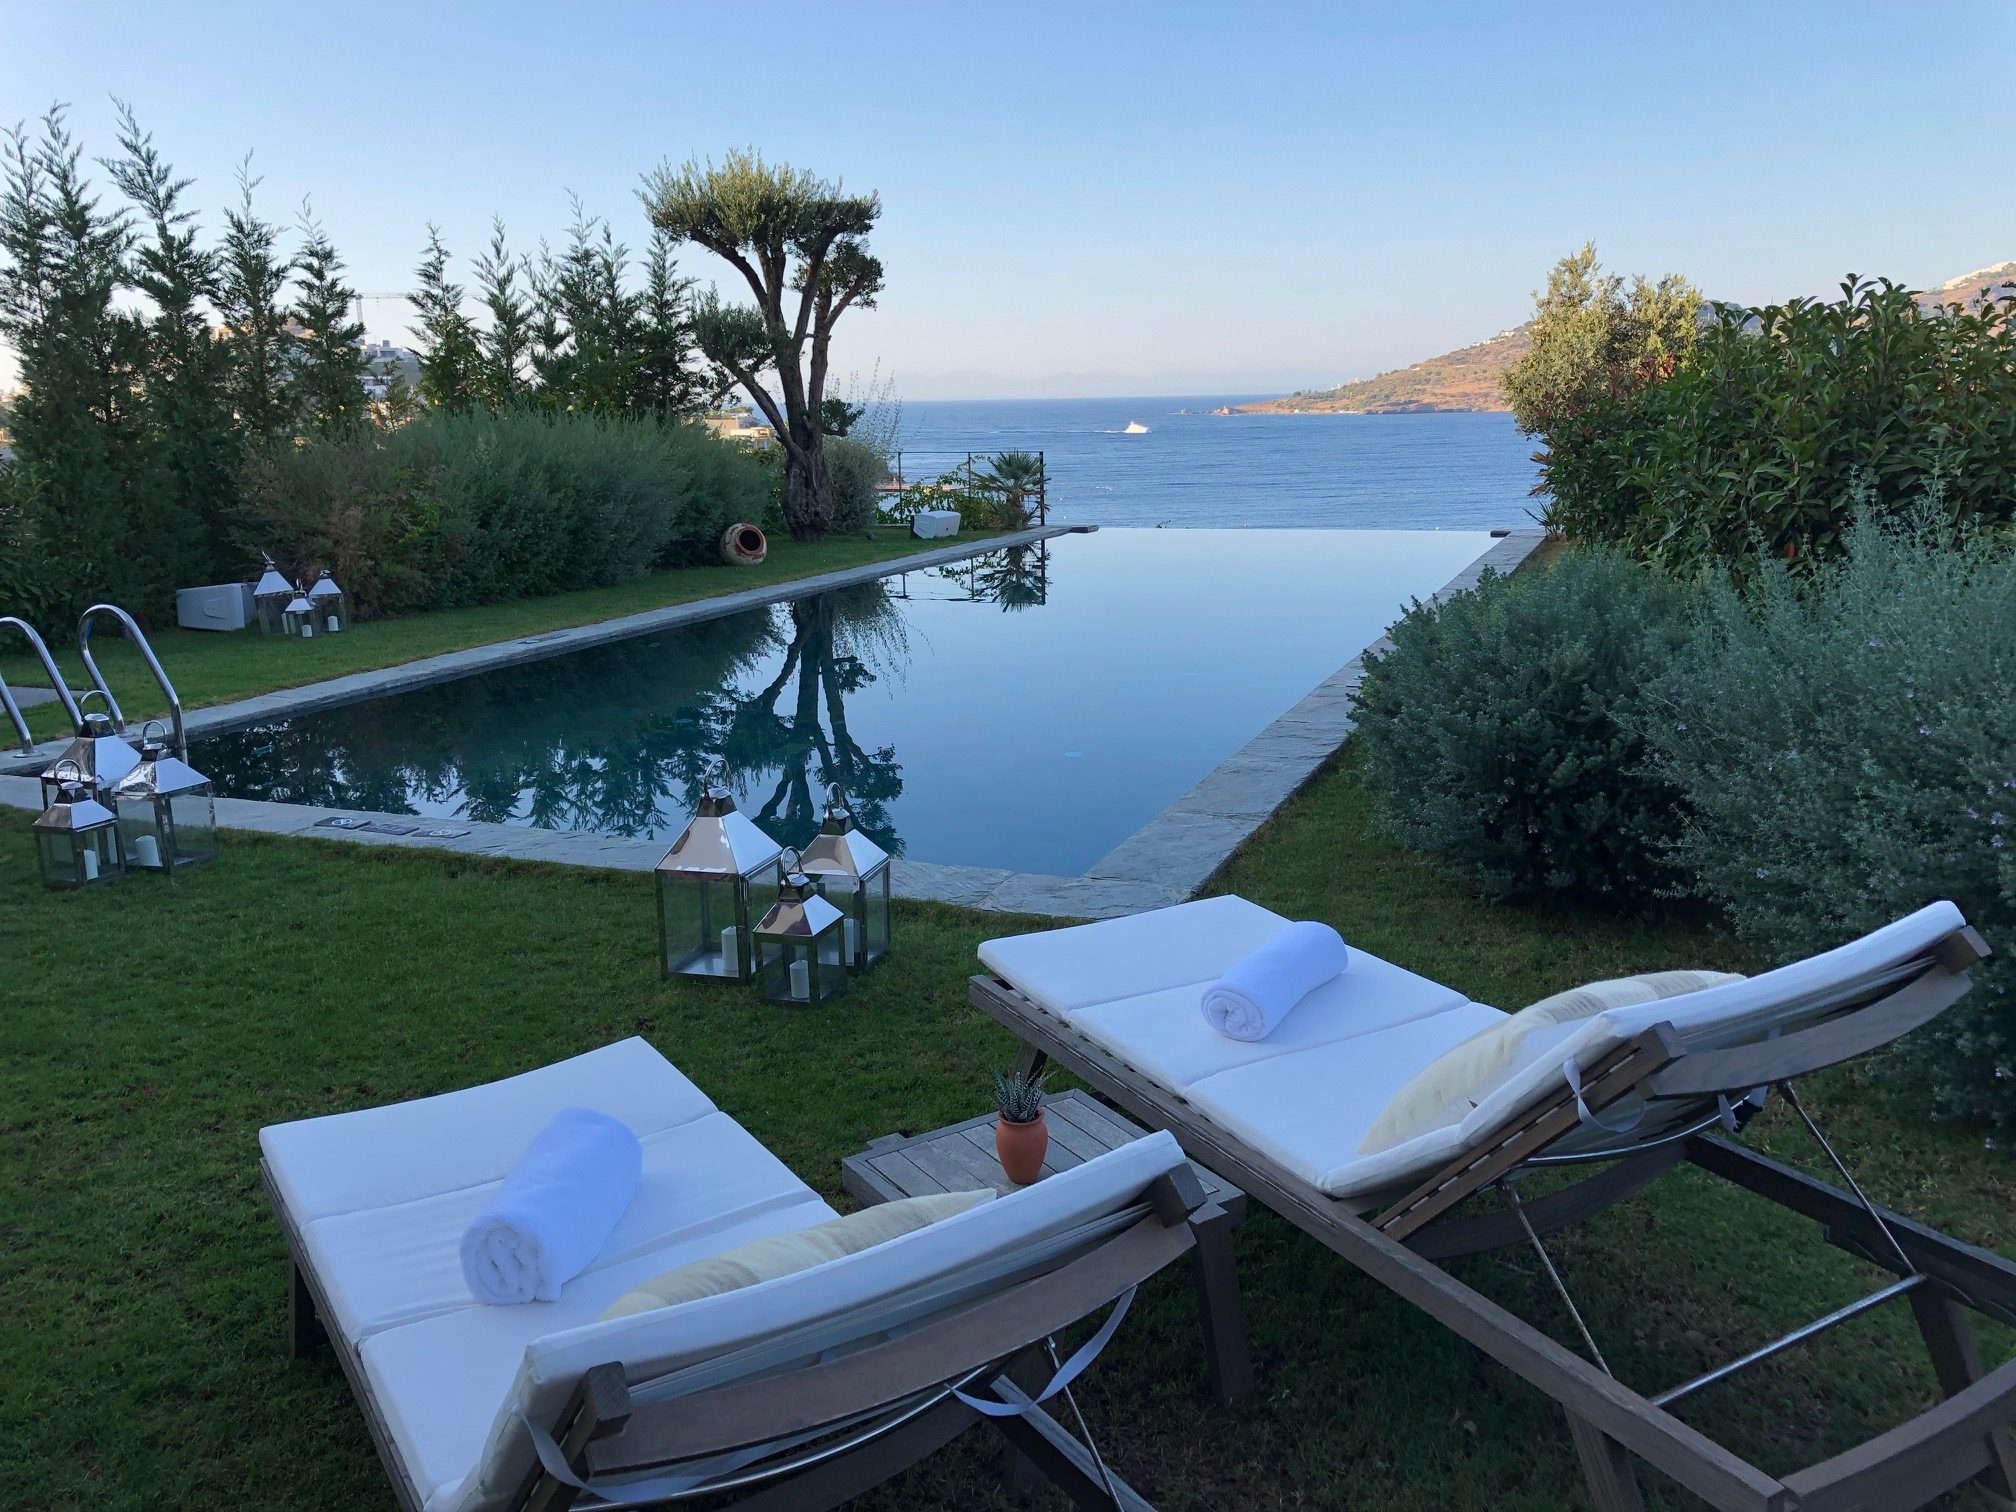 The Bodrum EDITION is near the remote Turkish city of Bodrum, overlooking the Aegean Sea.